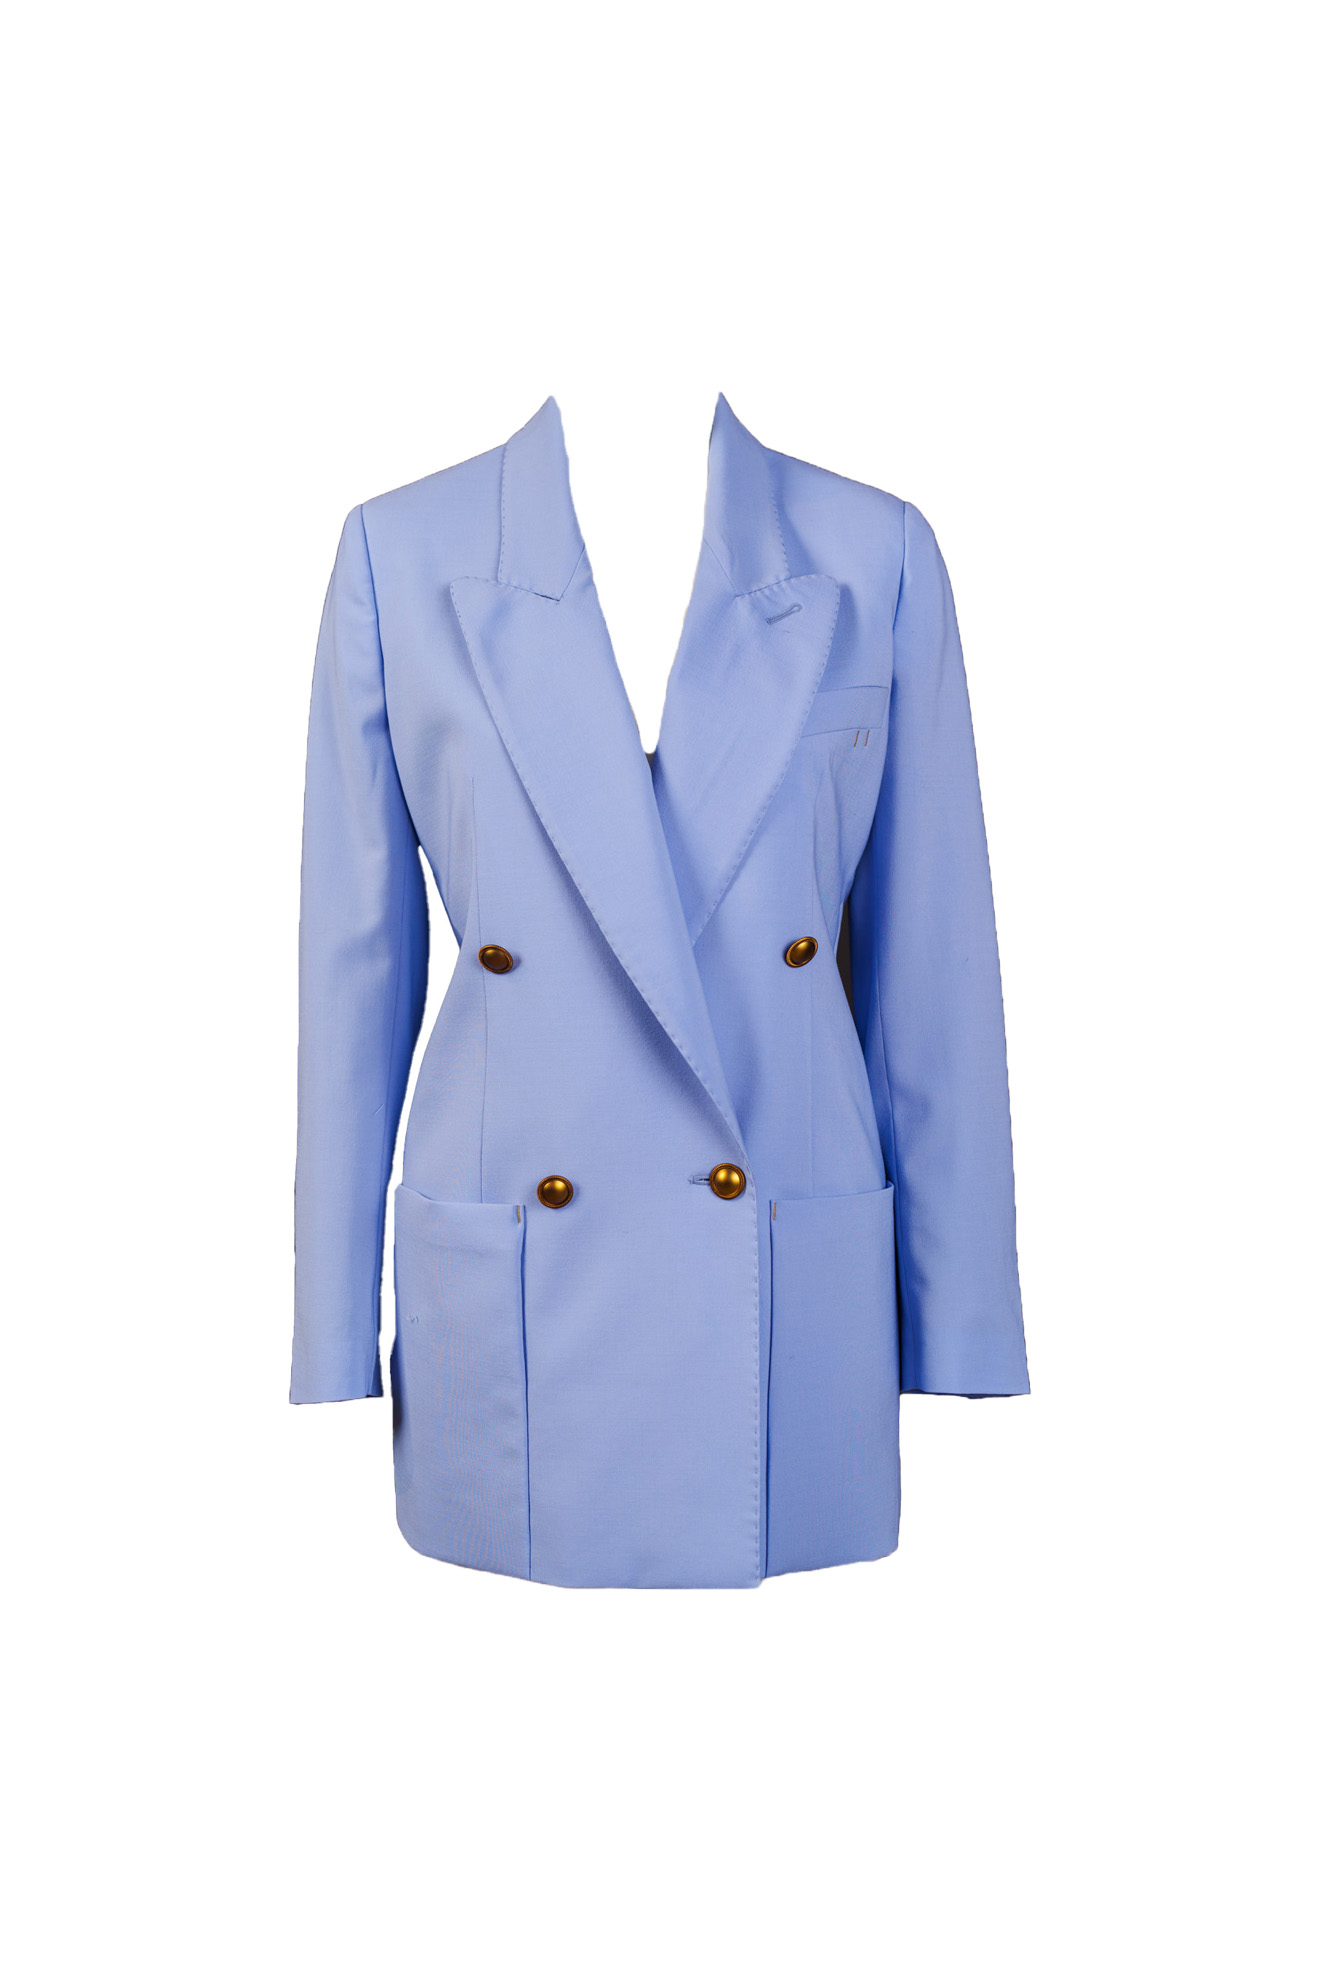 Lorena Antoniazzi Double breasted blazer with large front pockets blue 36